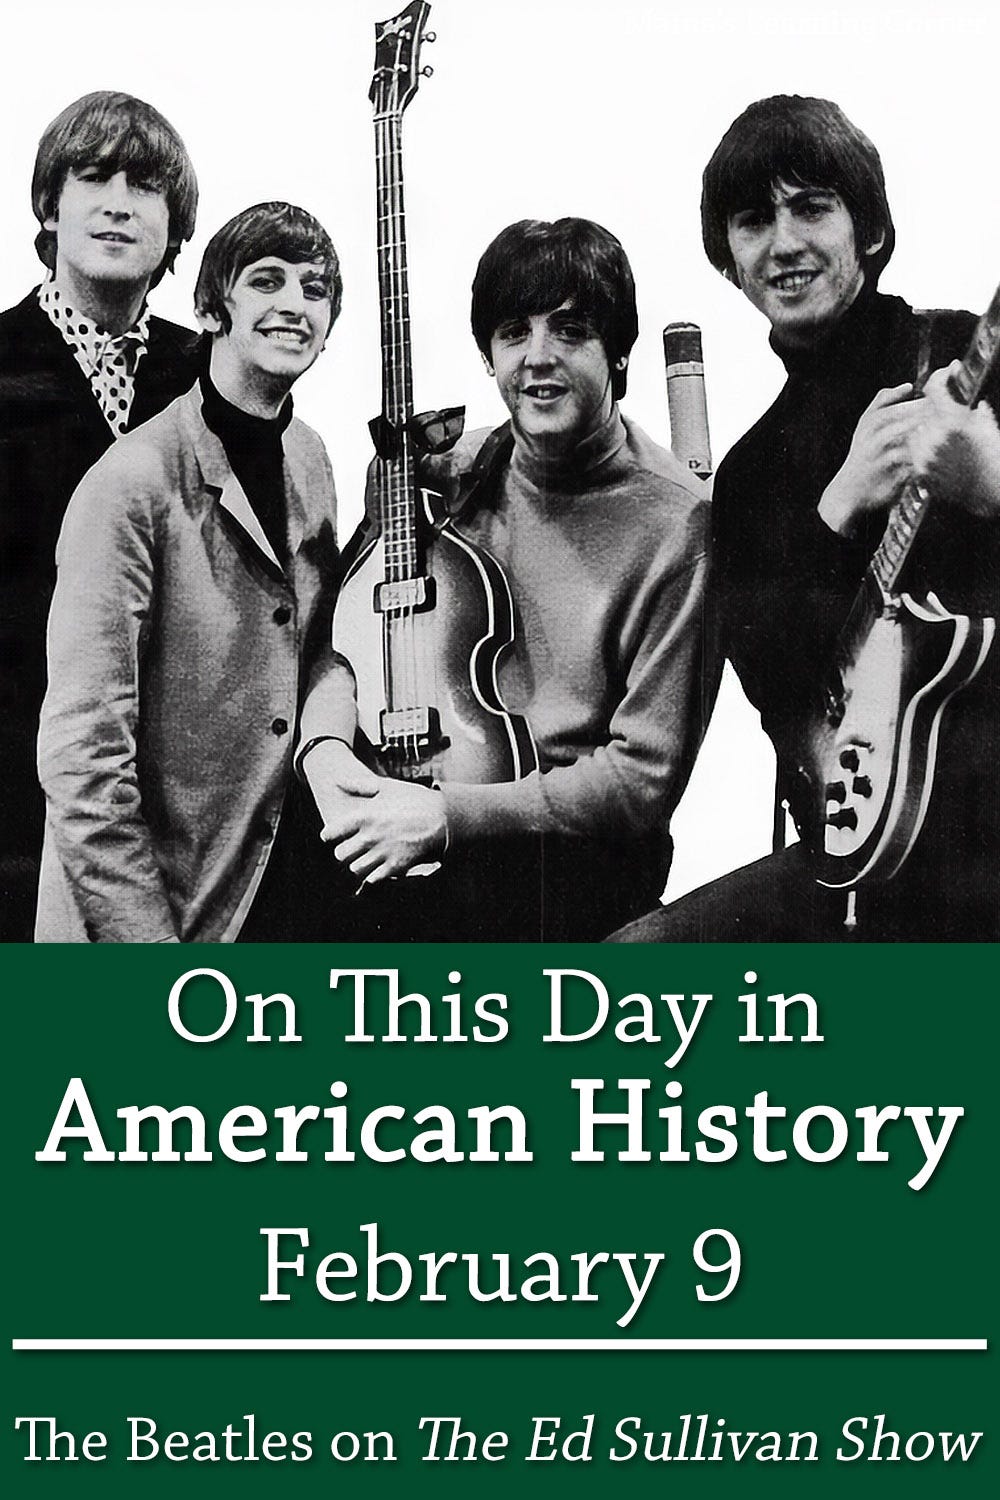 The Beatles Diaries: Celebrating 60 Years and The Feb 9, 1964